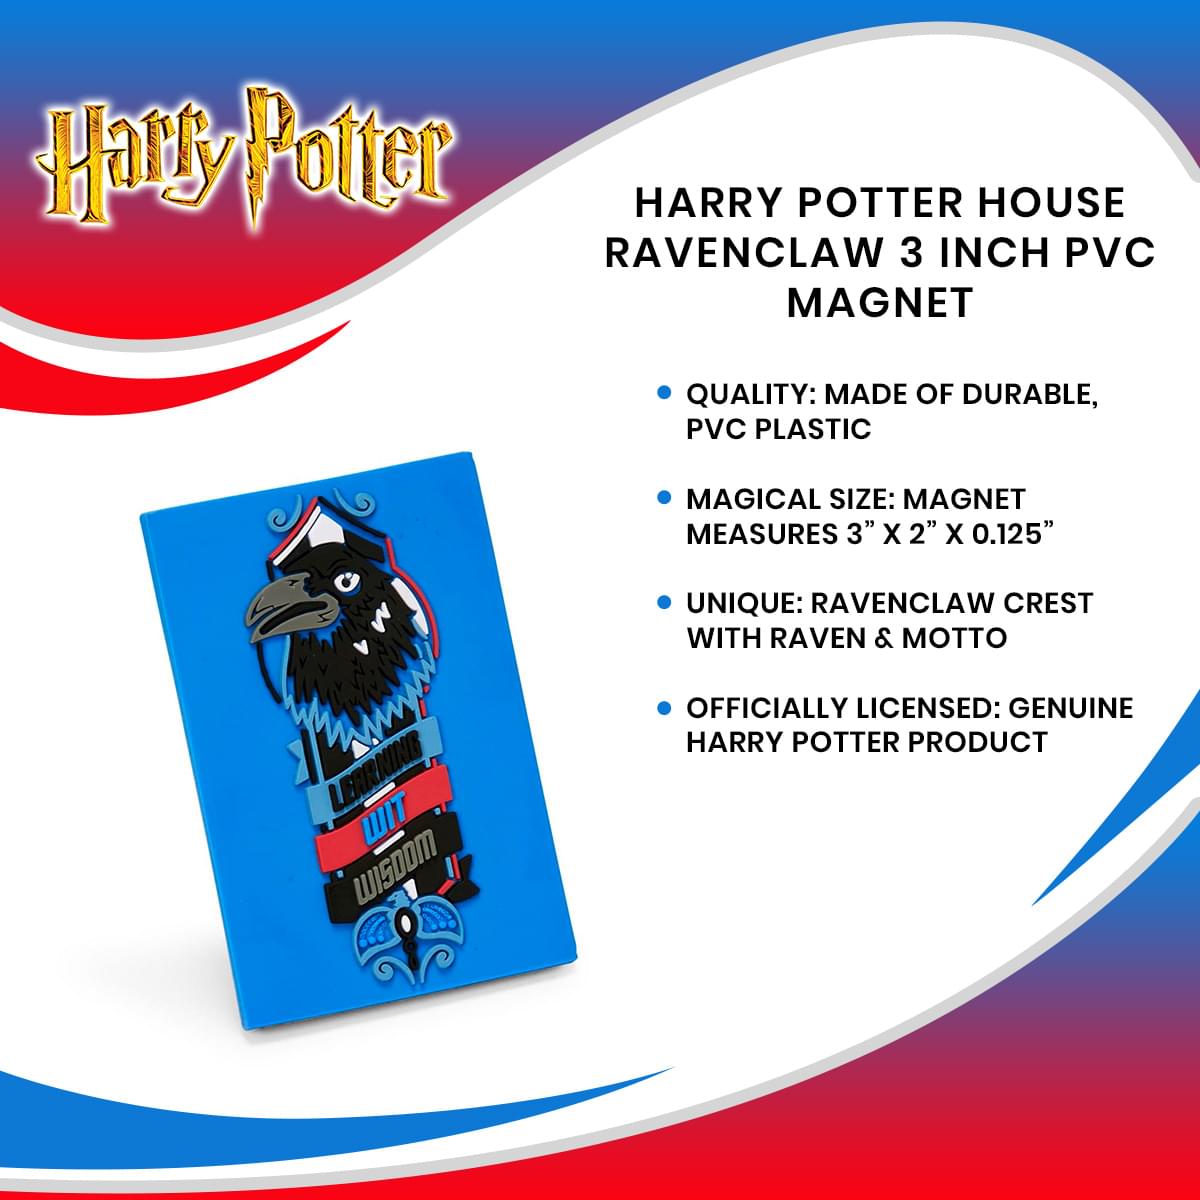 Harry Potter House Ravenclaw 3 Inch PVC Magnet